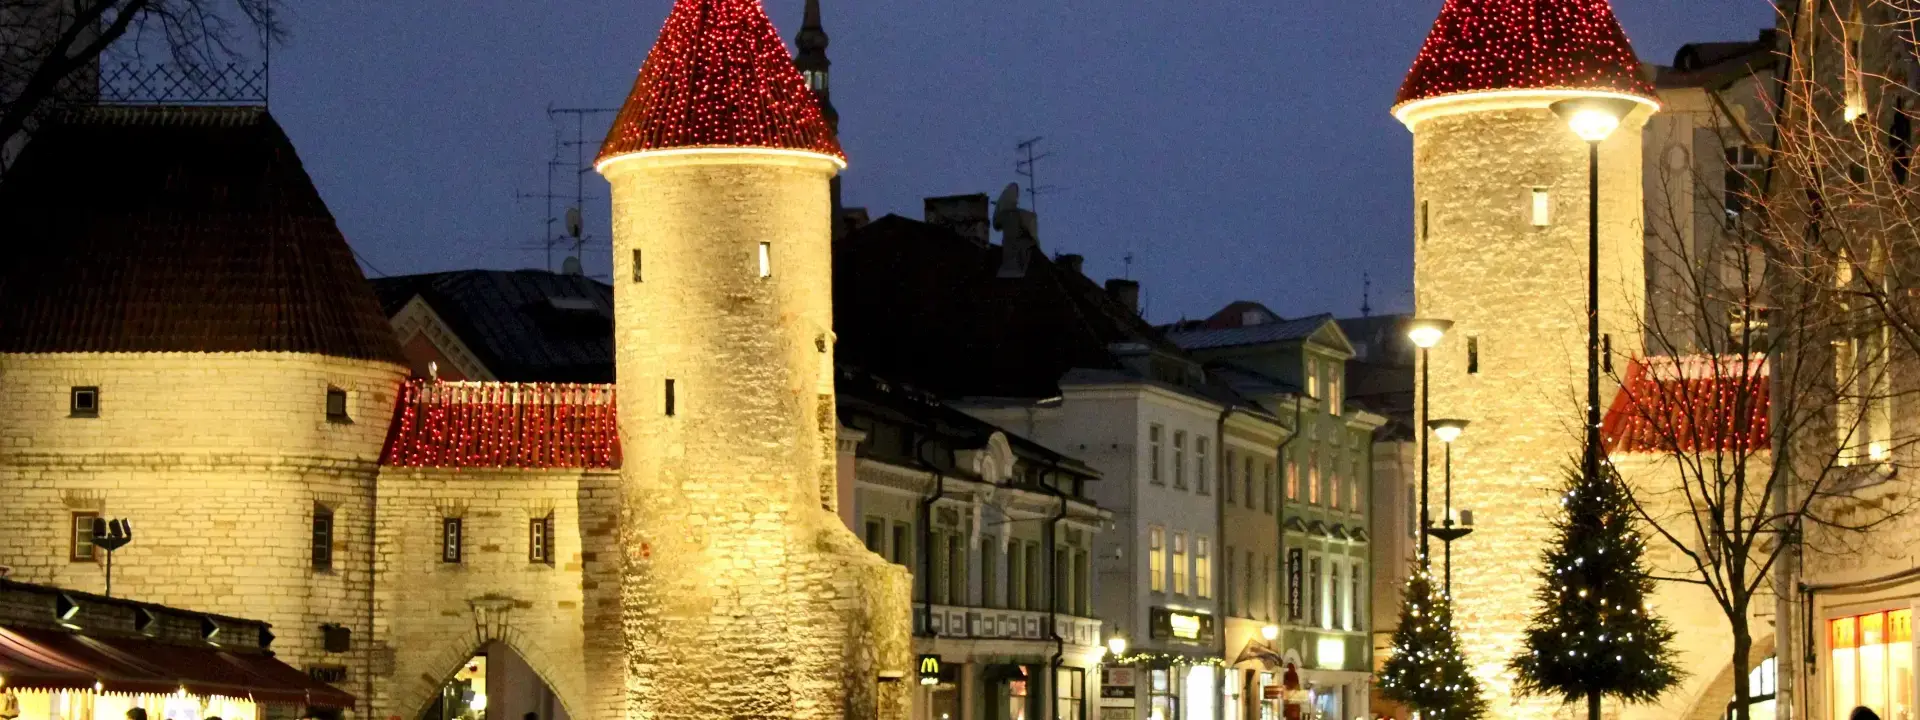 Volunteering in Estonia: A Journey of Giving and Discovery